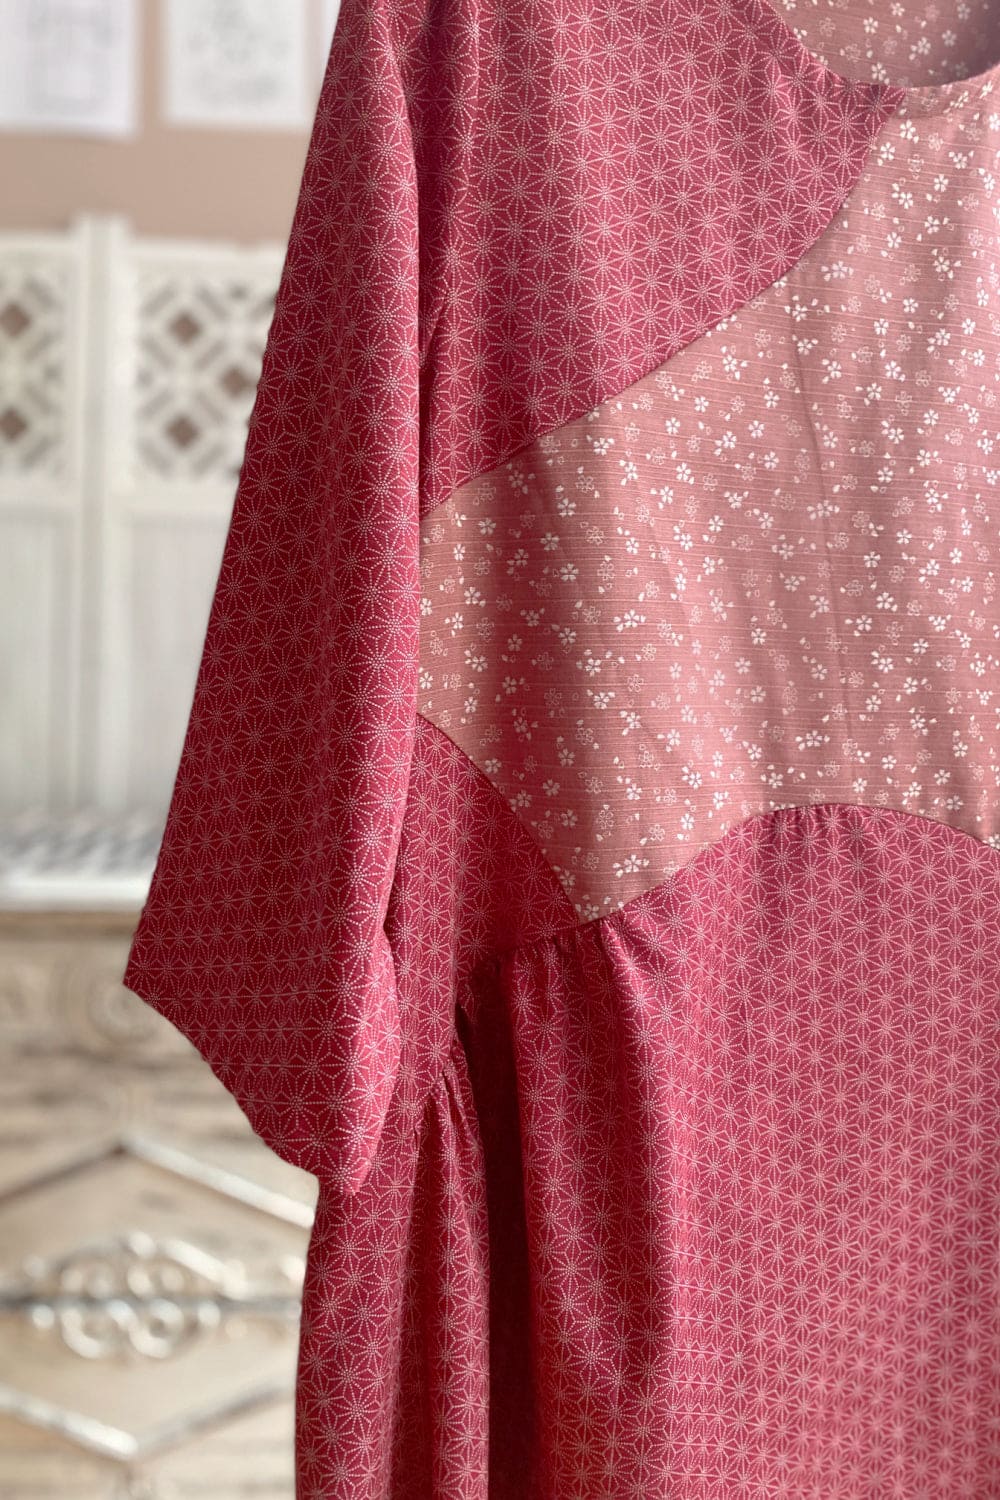 Close up details of the Japanese Cotton Seamed Tunic Dress.